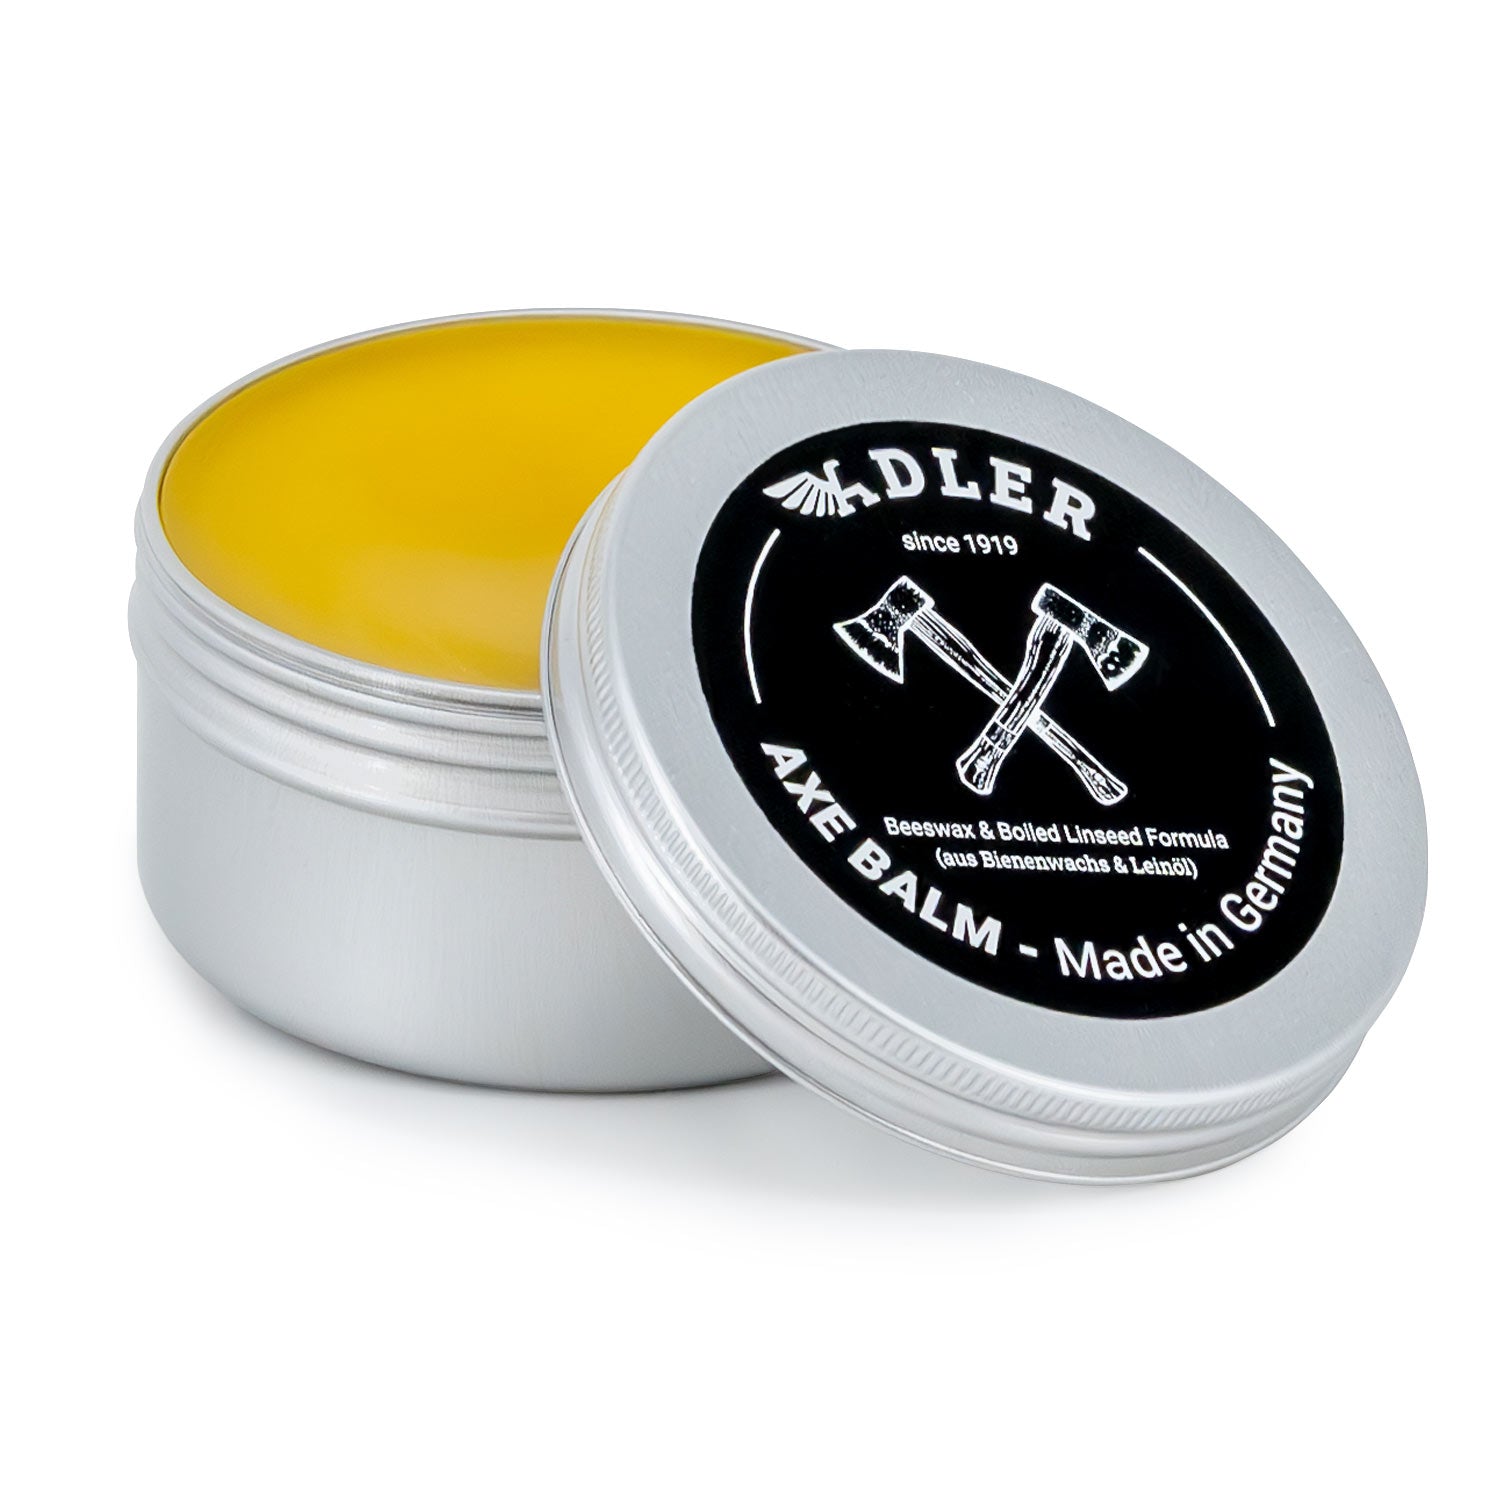 Axe Balm (made from Linseed Oil & Beeswax)